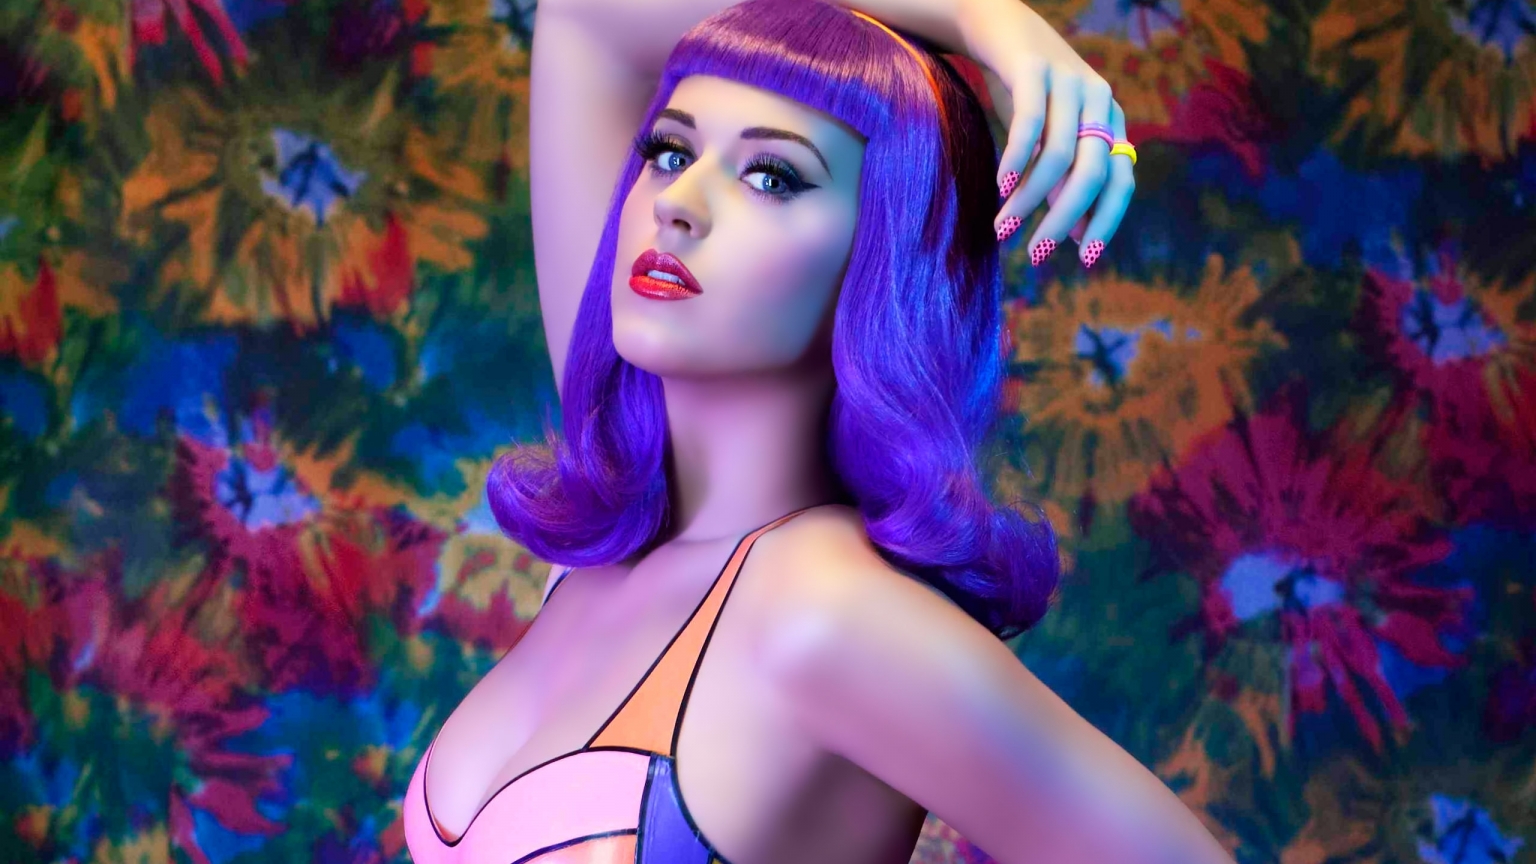 Colourful Katy Perry for 1536 x 864 HDTV resolution